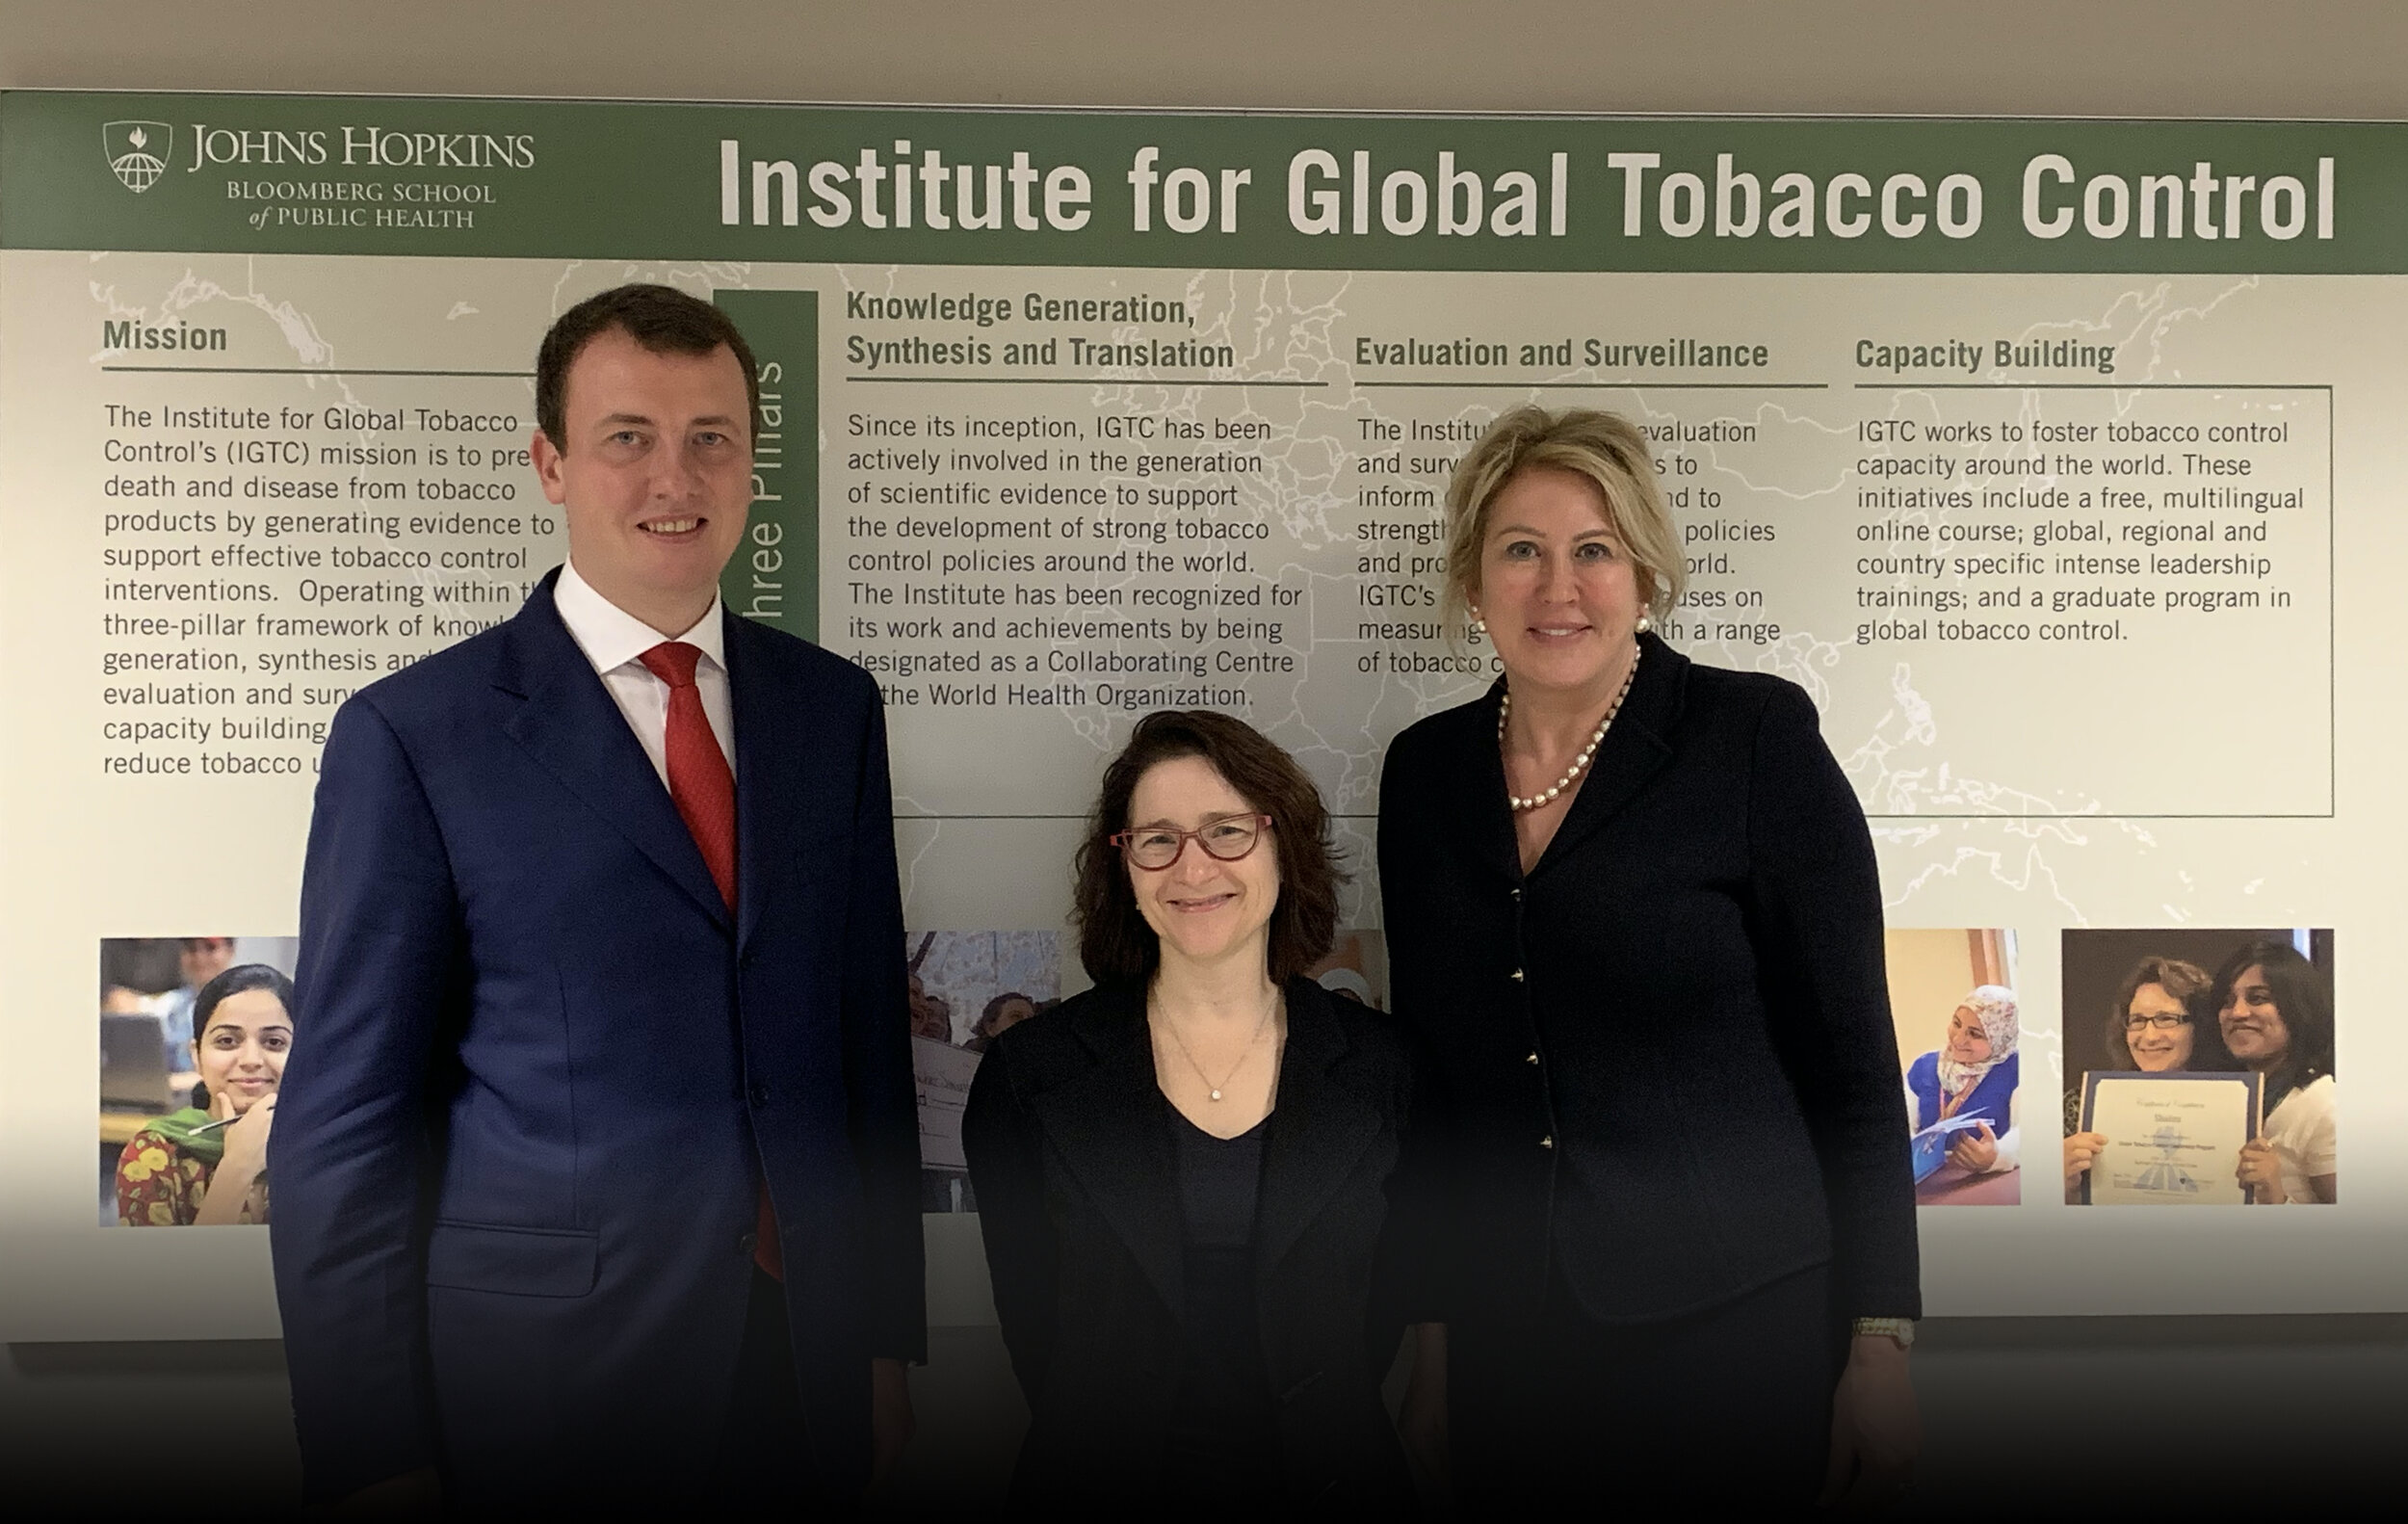 2019: Johns Hopkins School of Public Health Discussion with Eurasia on Vaping Trends